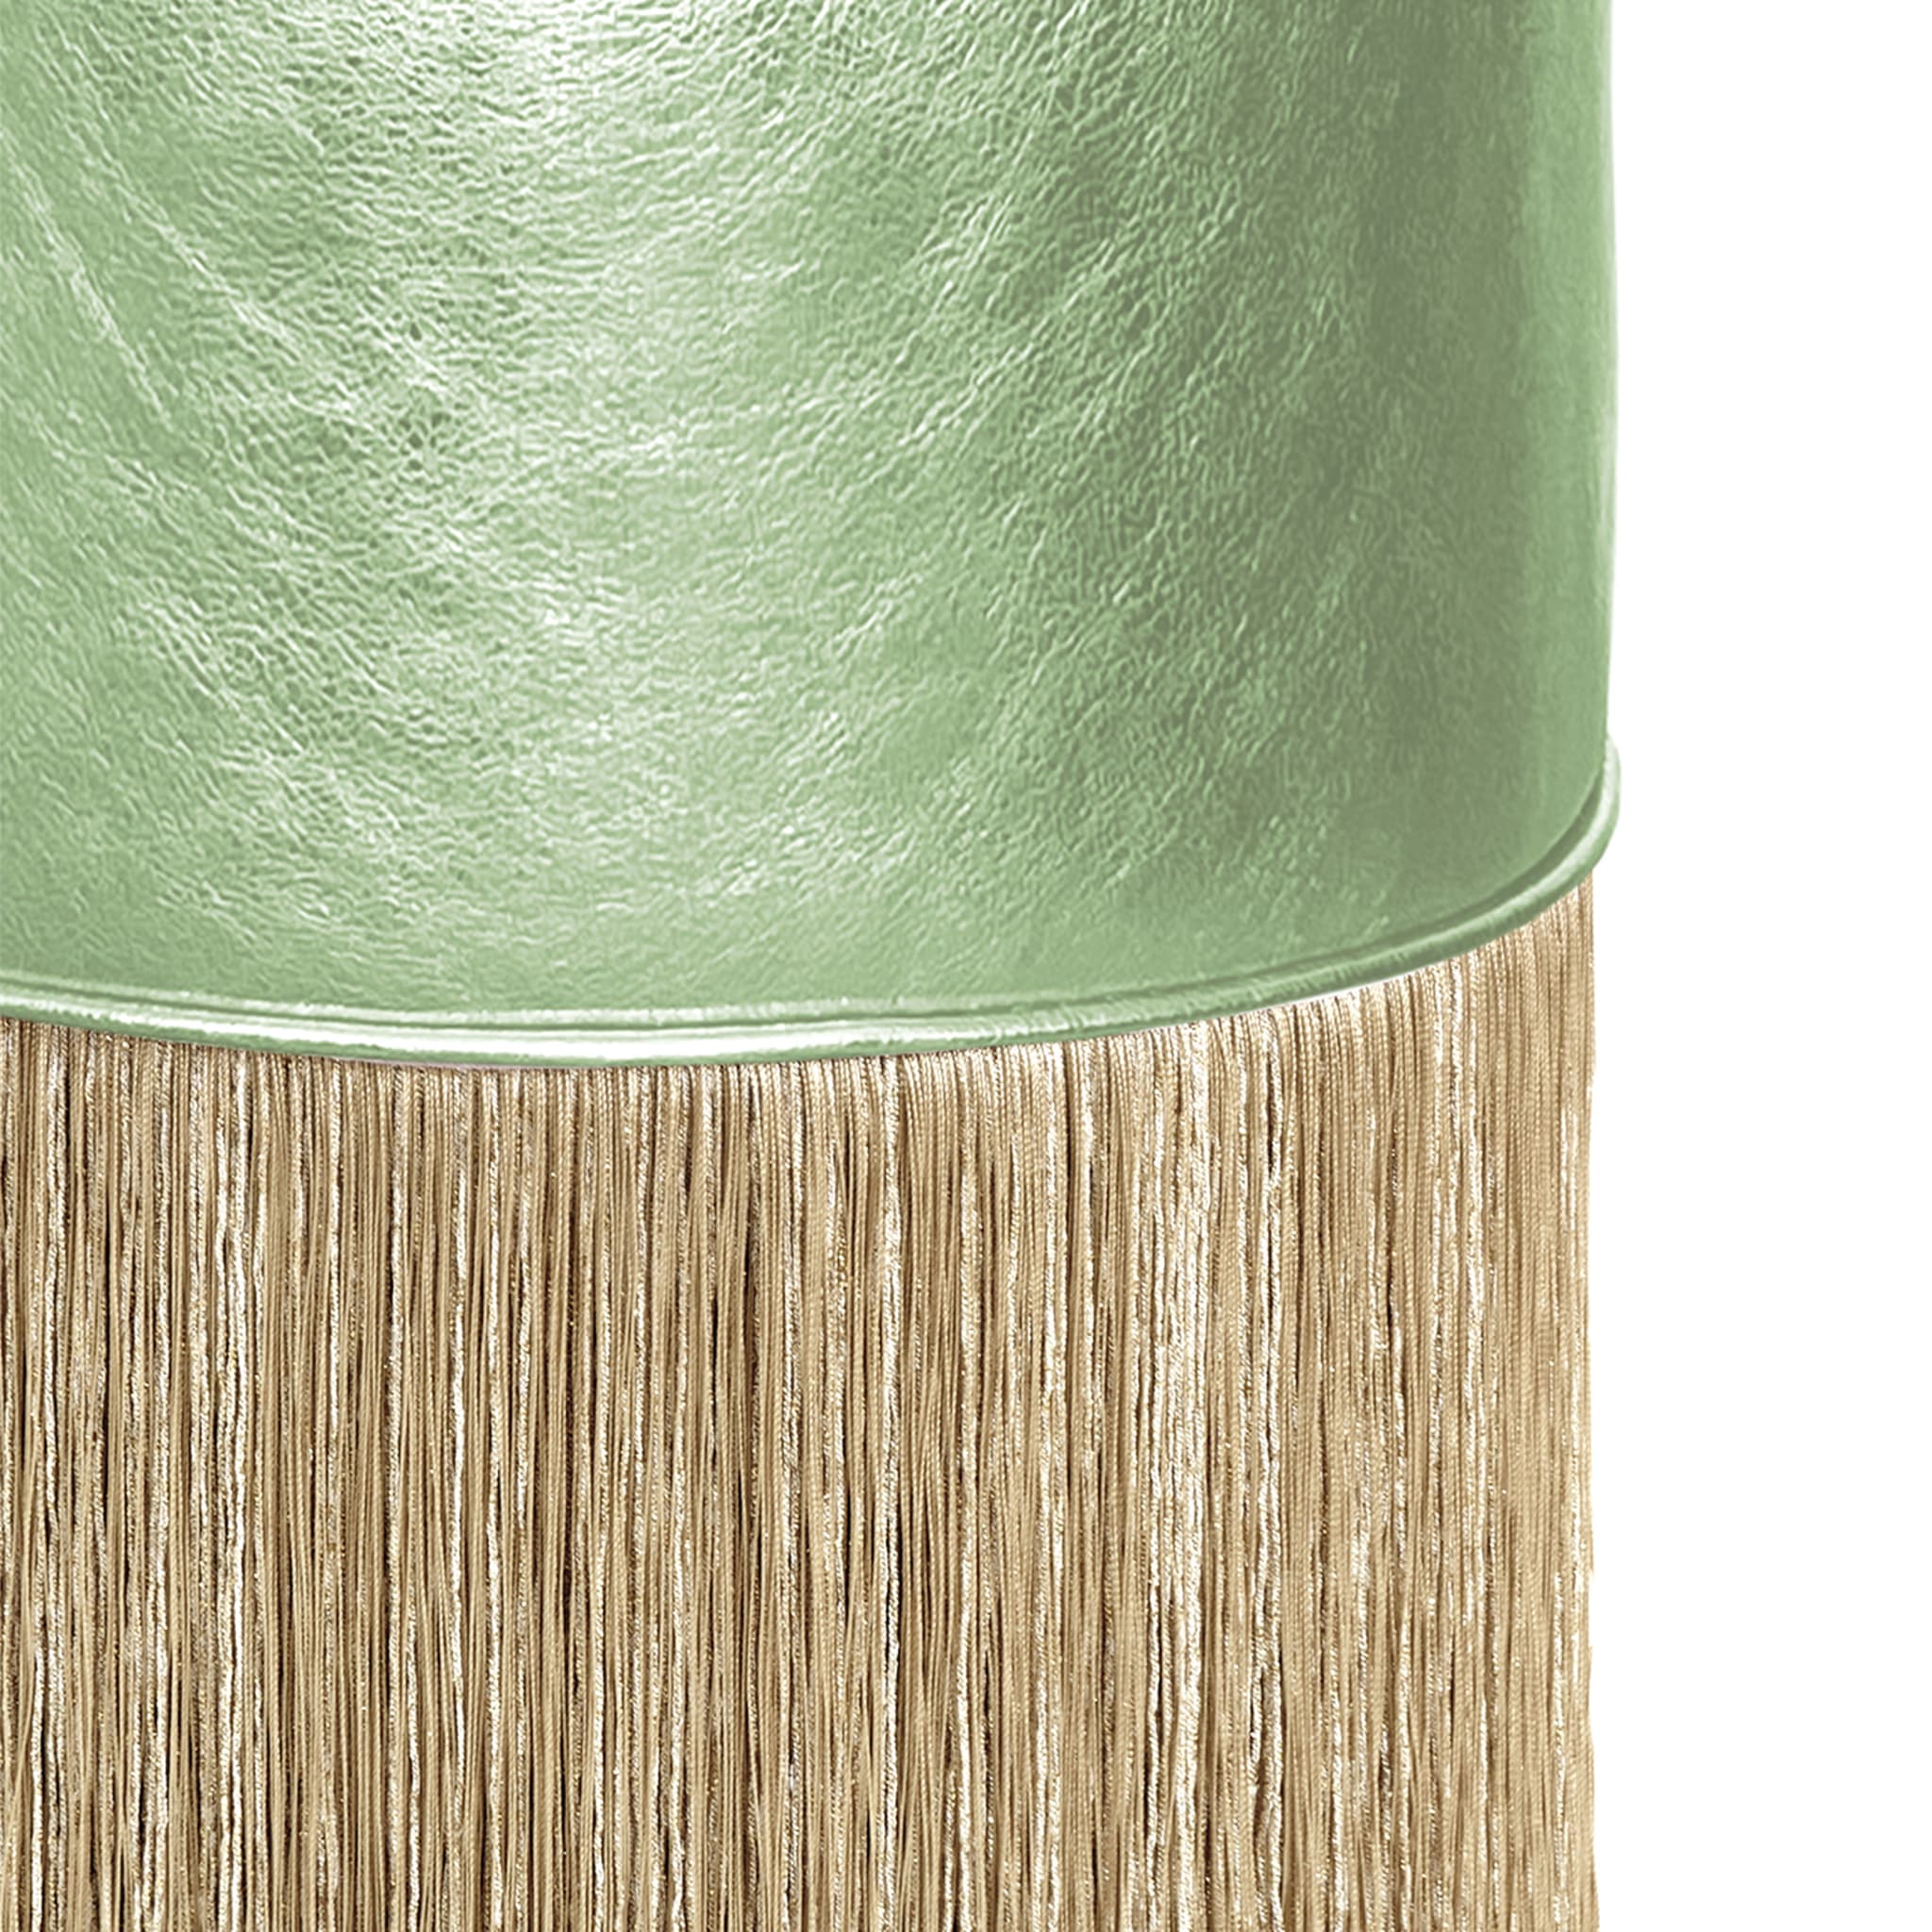 Gleaming Light Green Leather Gold Fringes Pouf by Lorenza Bozzoli - Alternative view 1